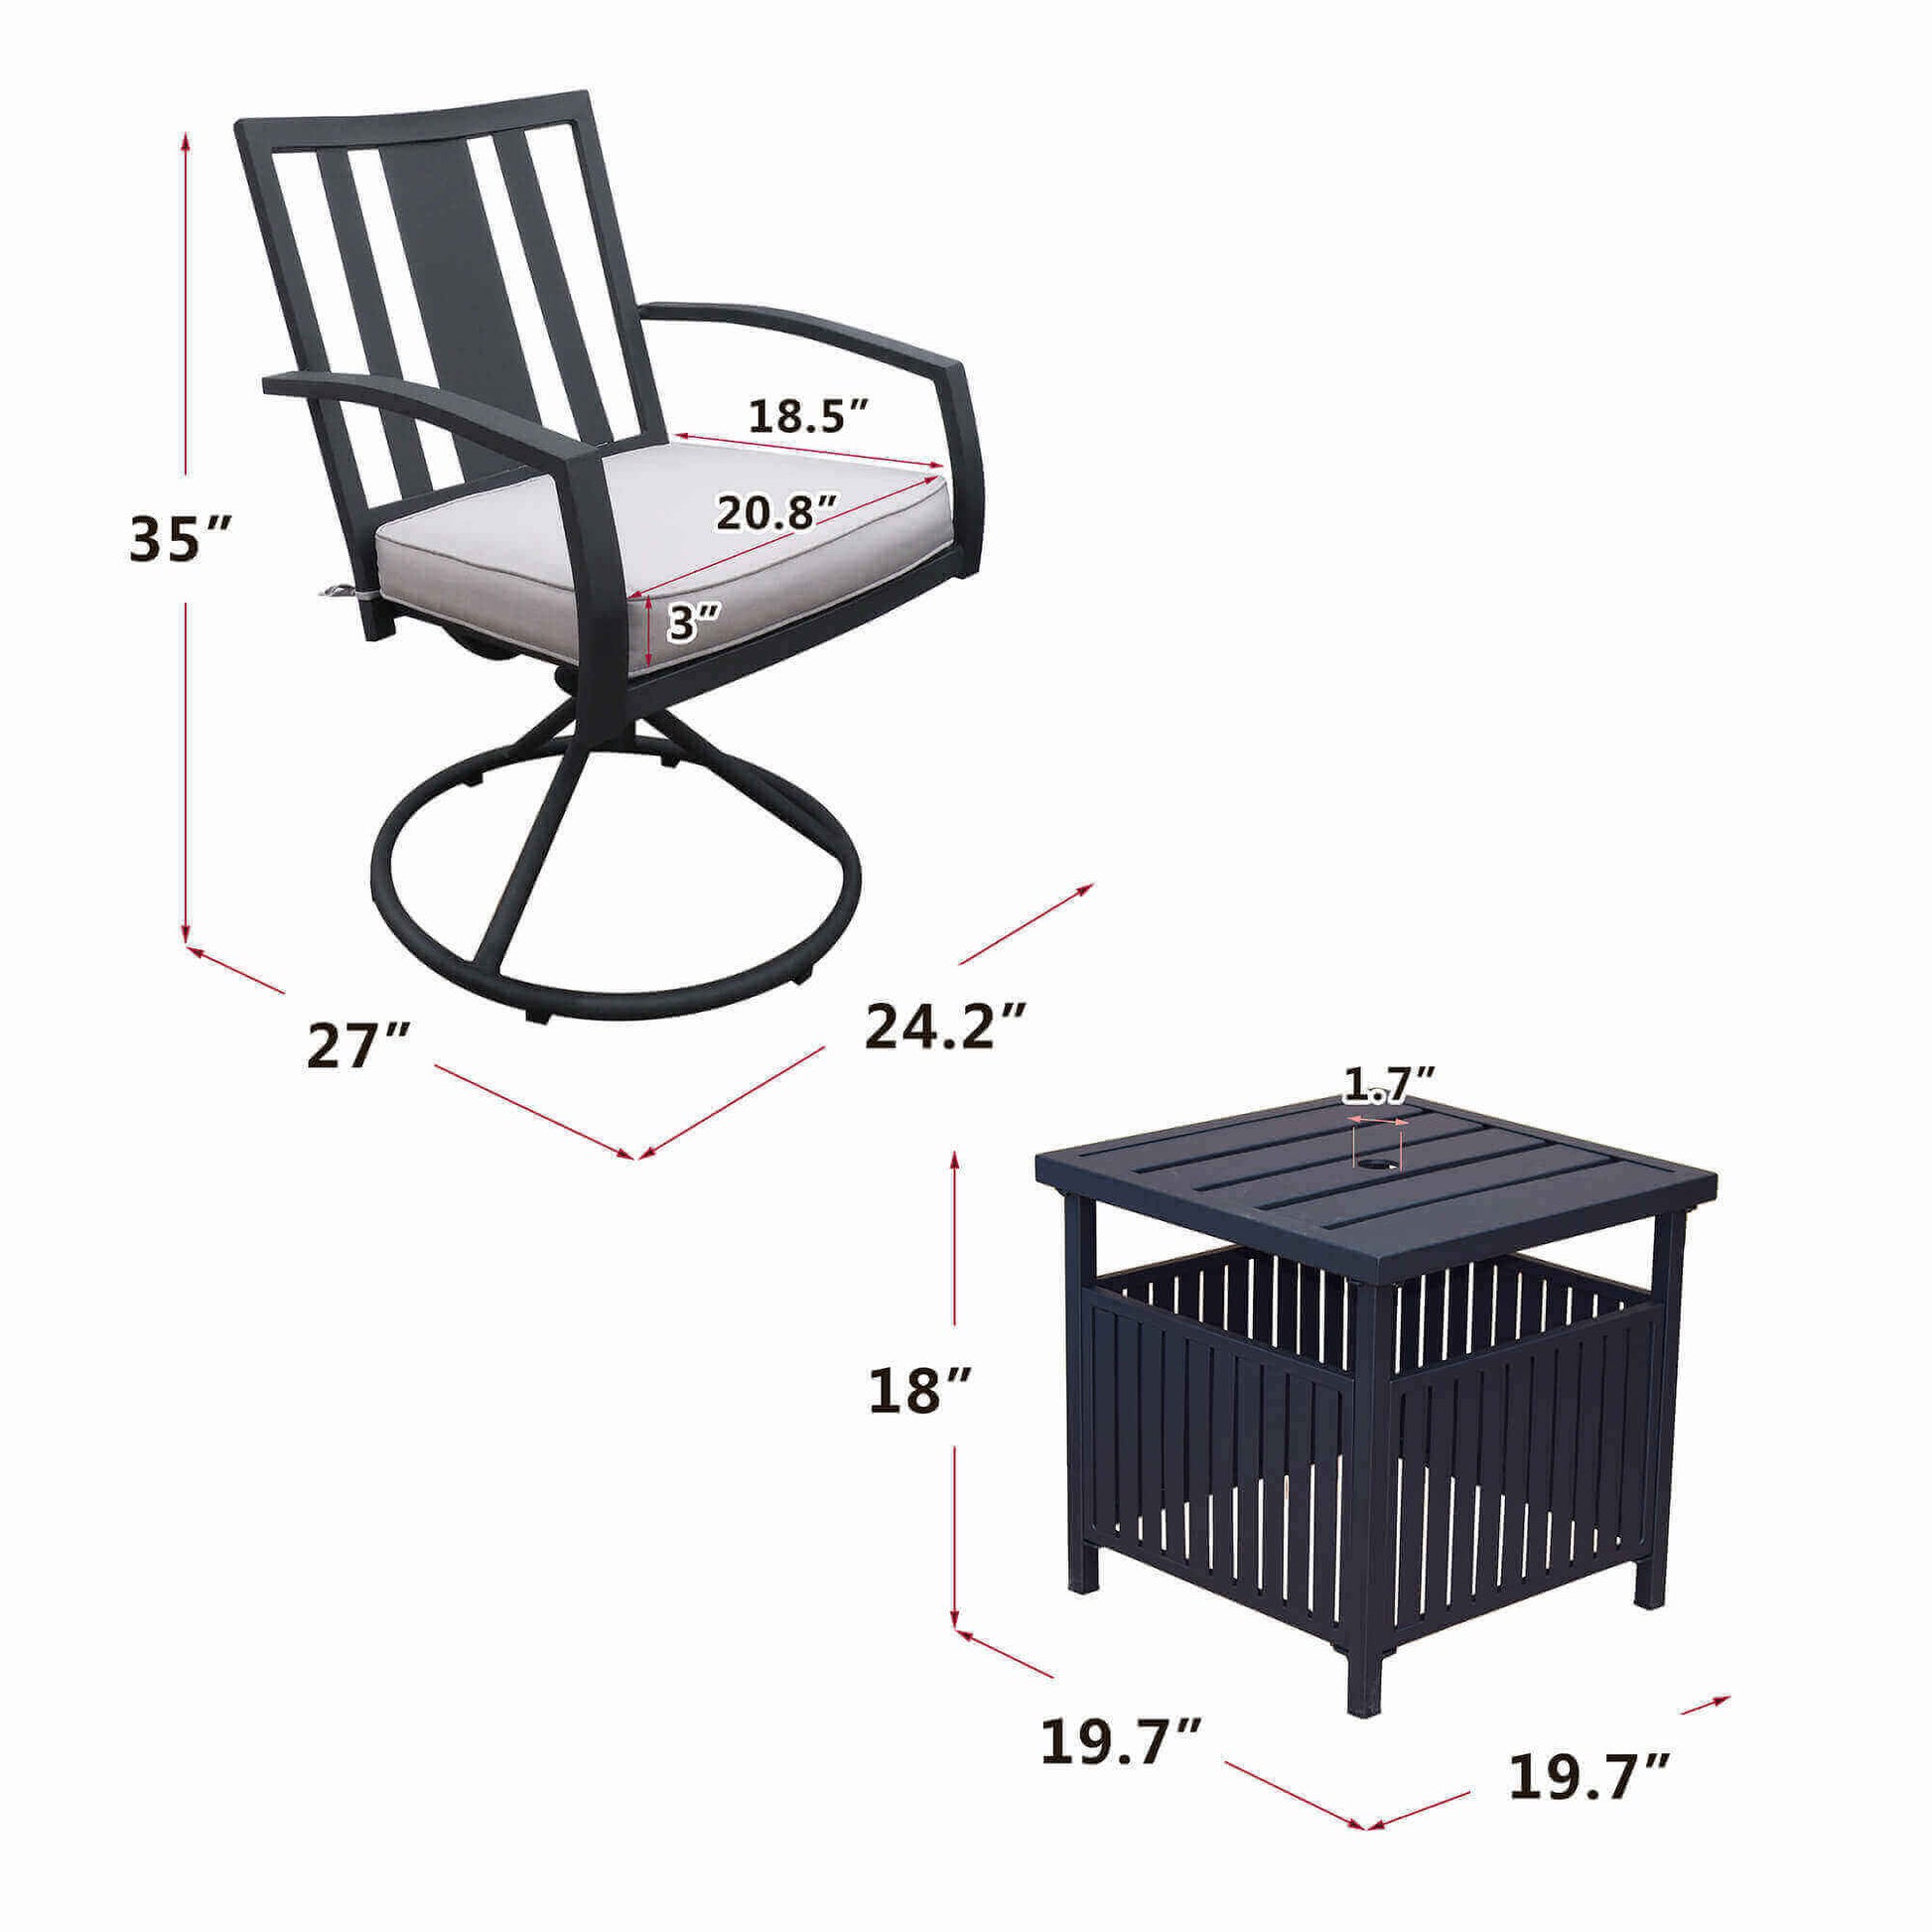 3Pcs Outdoor Patio Swivel Rocker Chairs /Patio 360-Degree Swivel Metal Frame Dining Chairs Set of 3 with Coffee Table